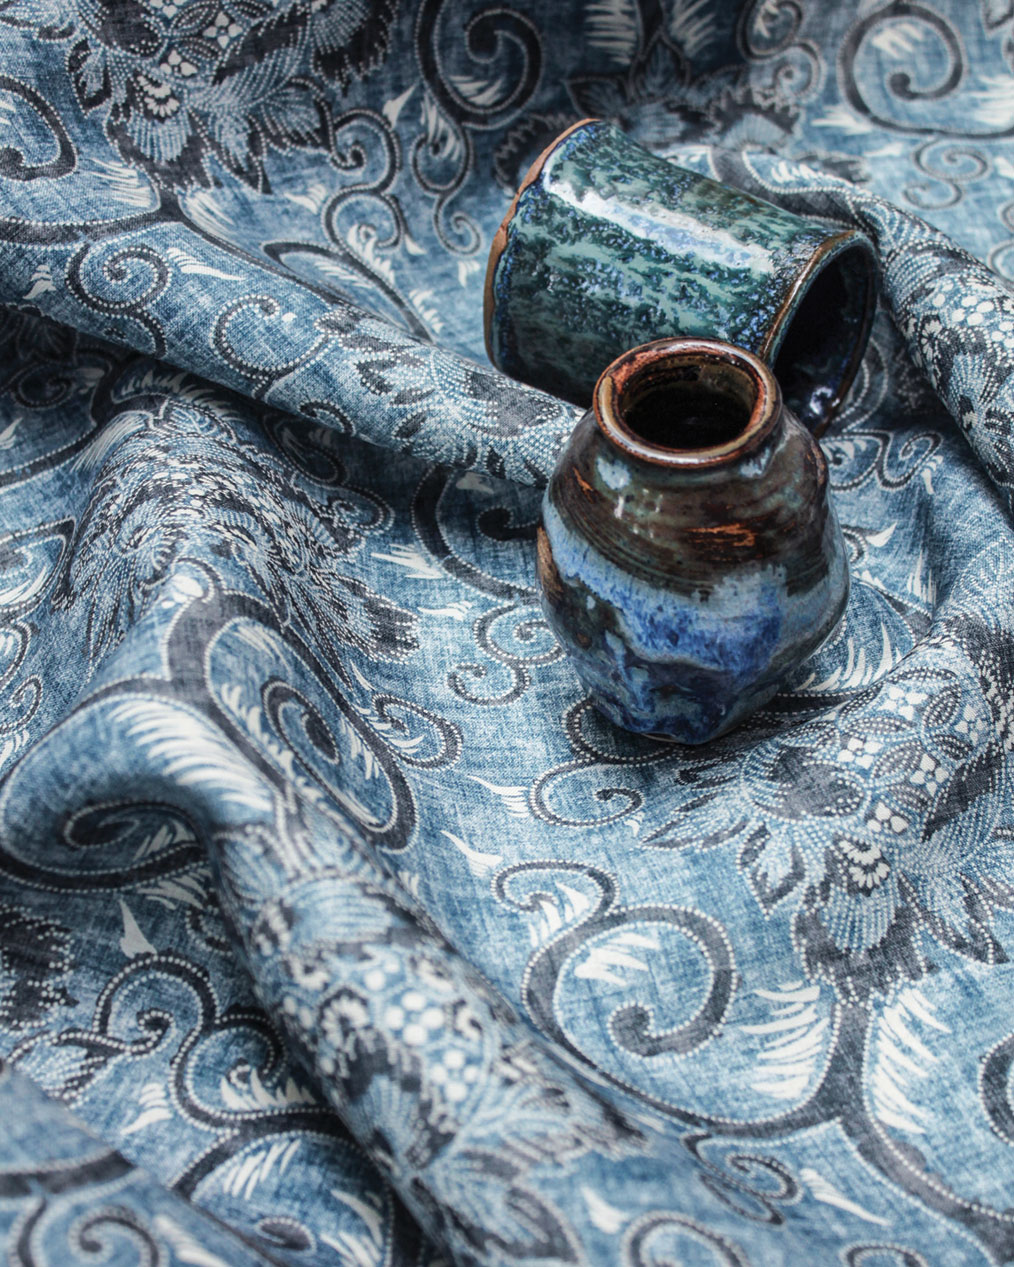 Indigo blue fabric designed by Suzanne Tucker, pictured with blue pottery pieces